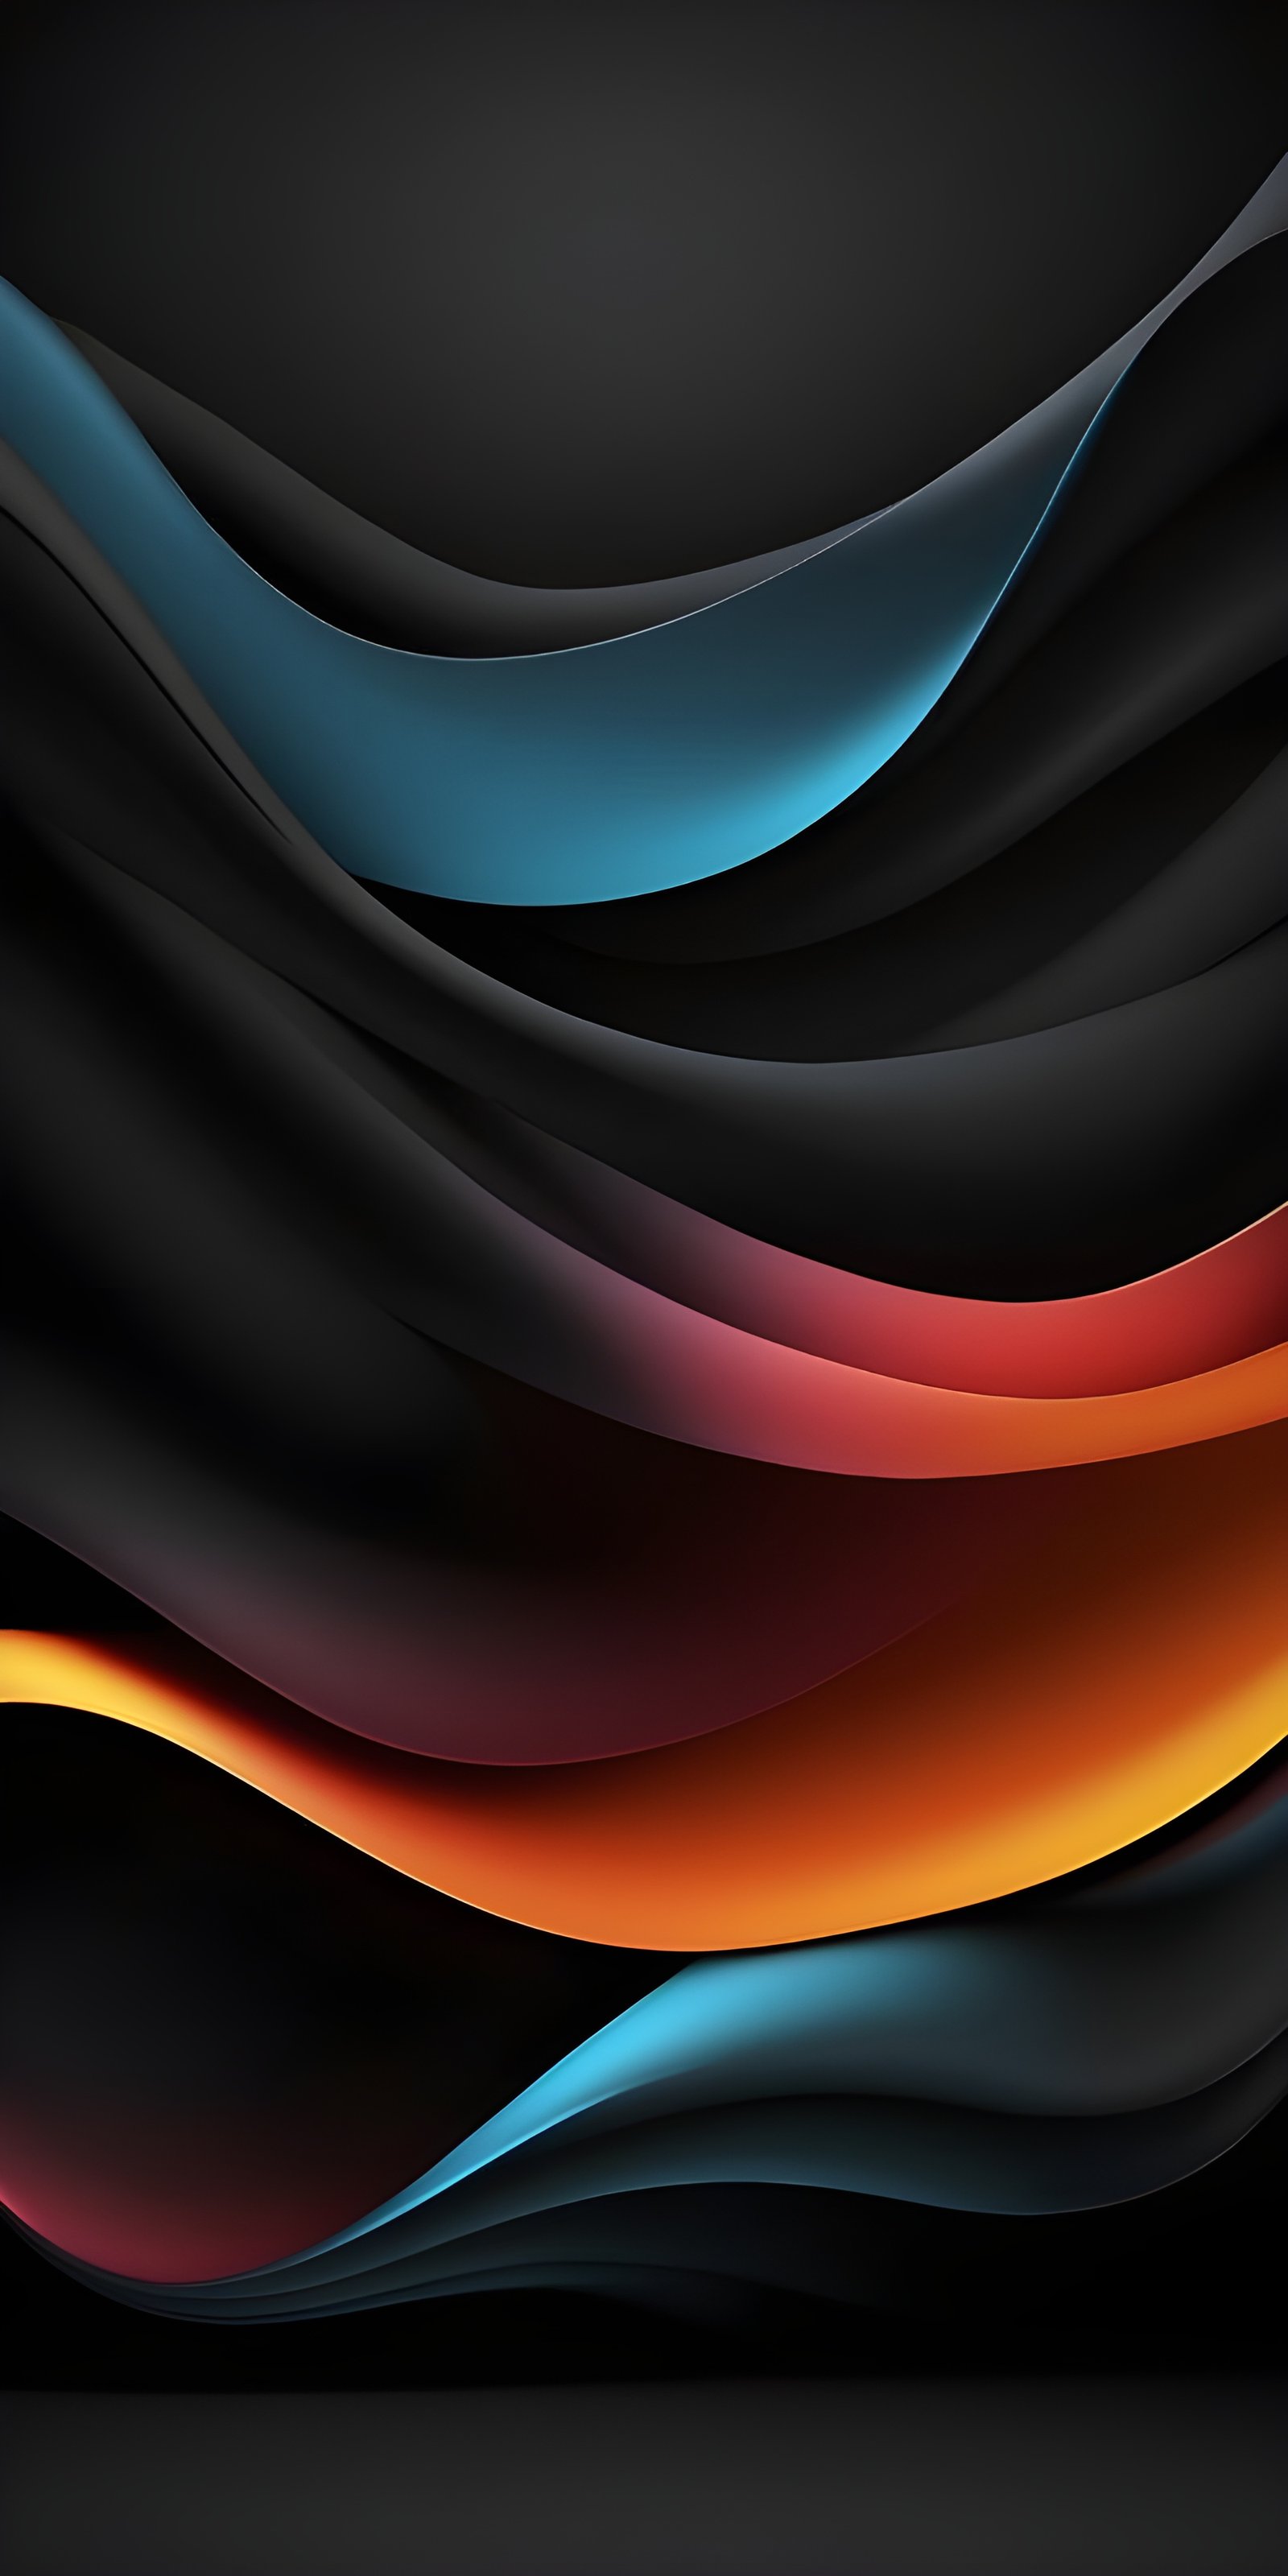 Interesting Abstract Black, Blue and Orange Phone Wallpaper